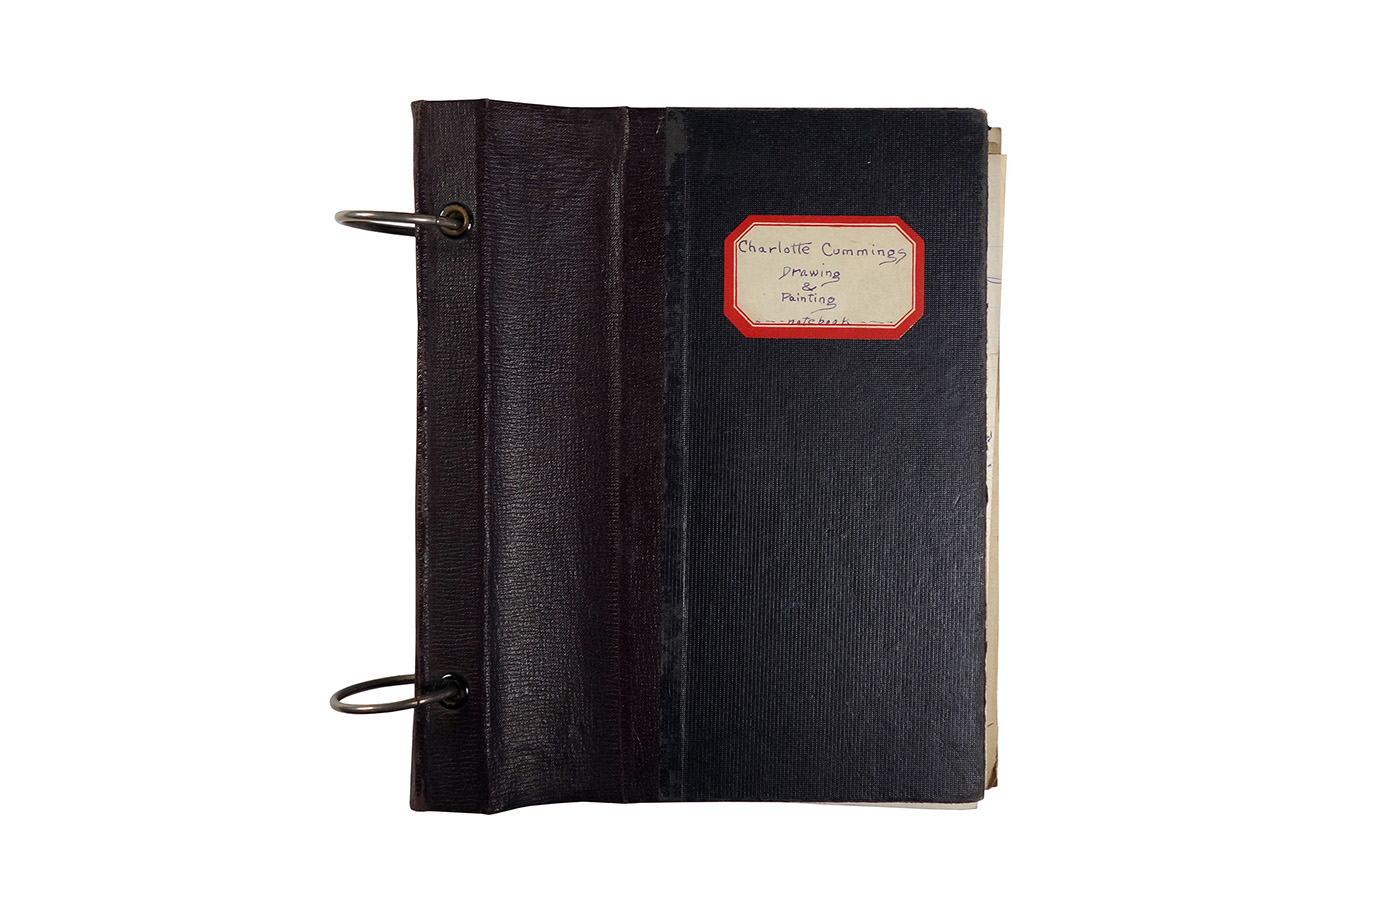 Binder with class notes, made in 1921/1922 by Charlotte Cummings while at the University of Wisconsin-Madison. Label on front of binder says "Drawing and Painting notebook."